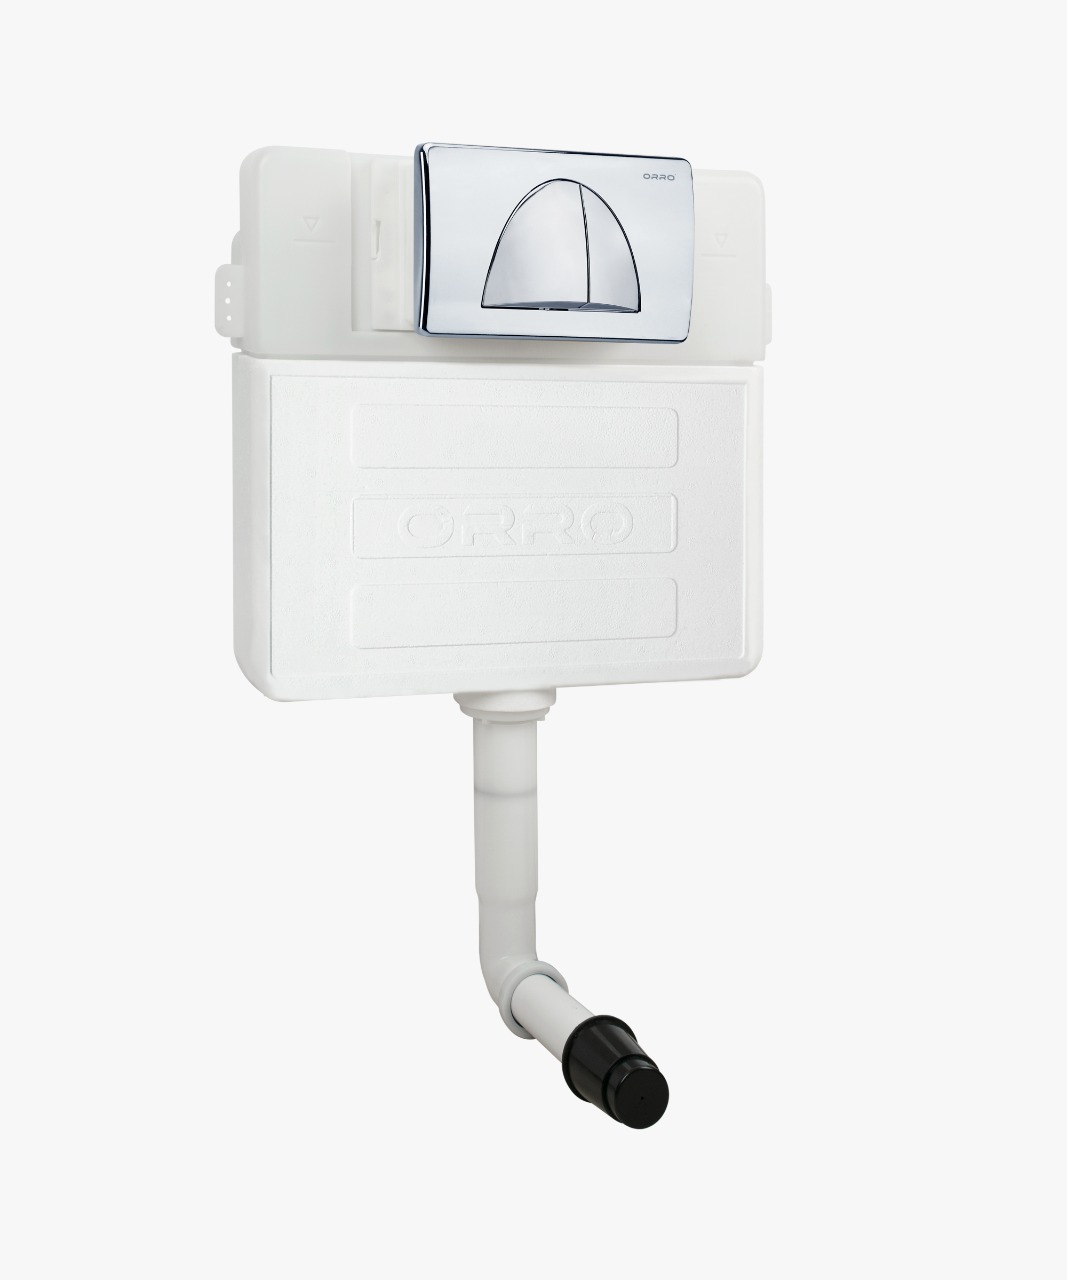 Porta Sanitary Ware - OR500 Concealed Cistern